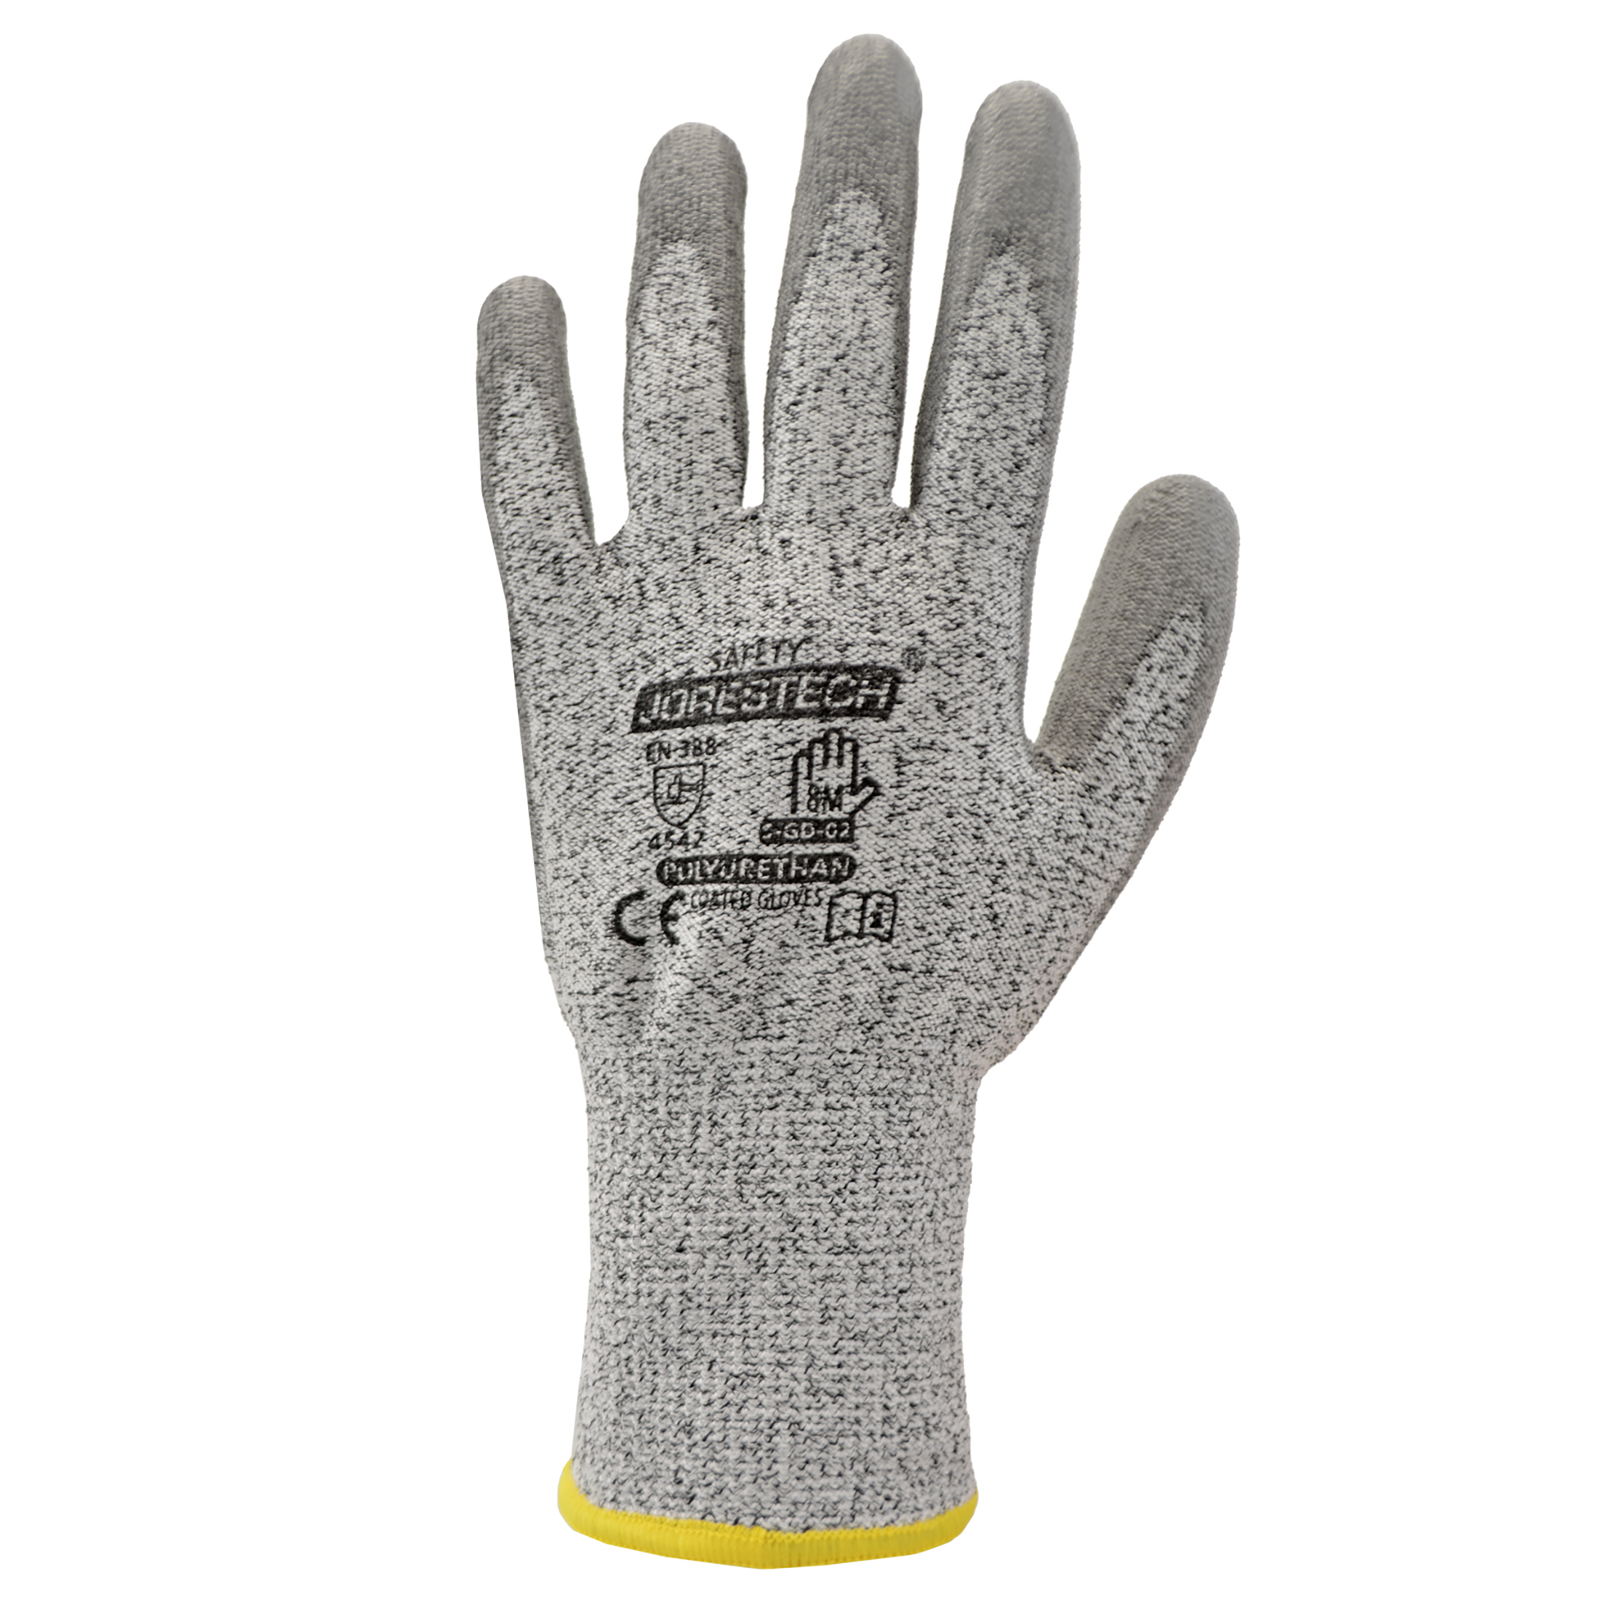 Cut resistant JORESTECH gray safety work gloves with polyurethane dipped palm